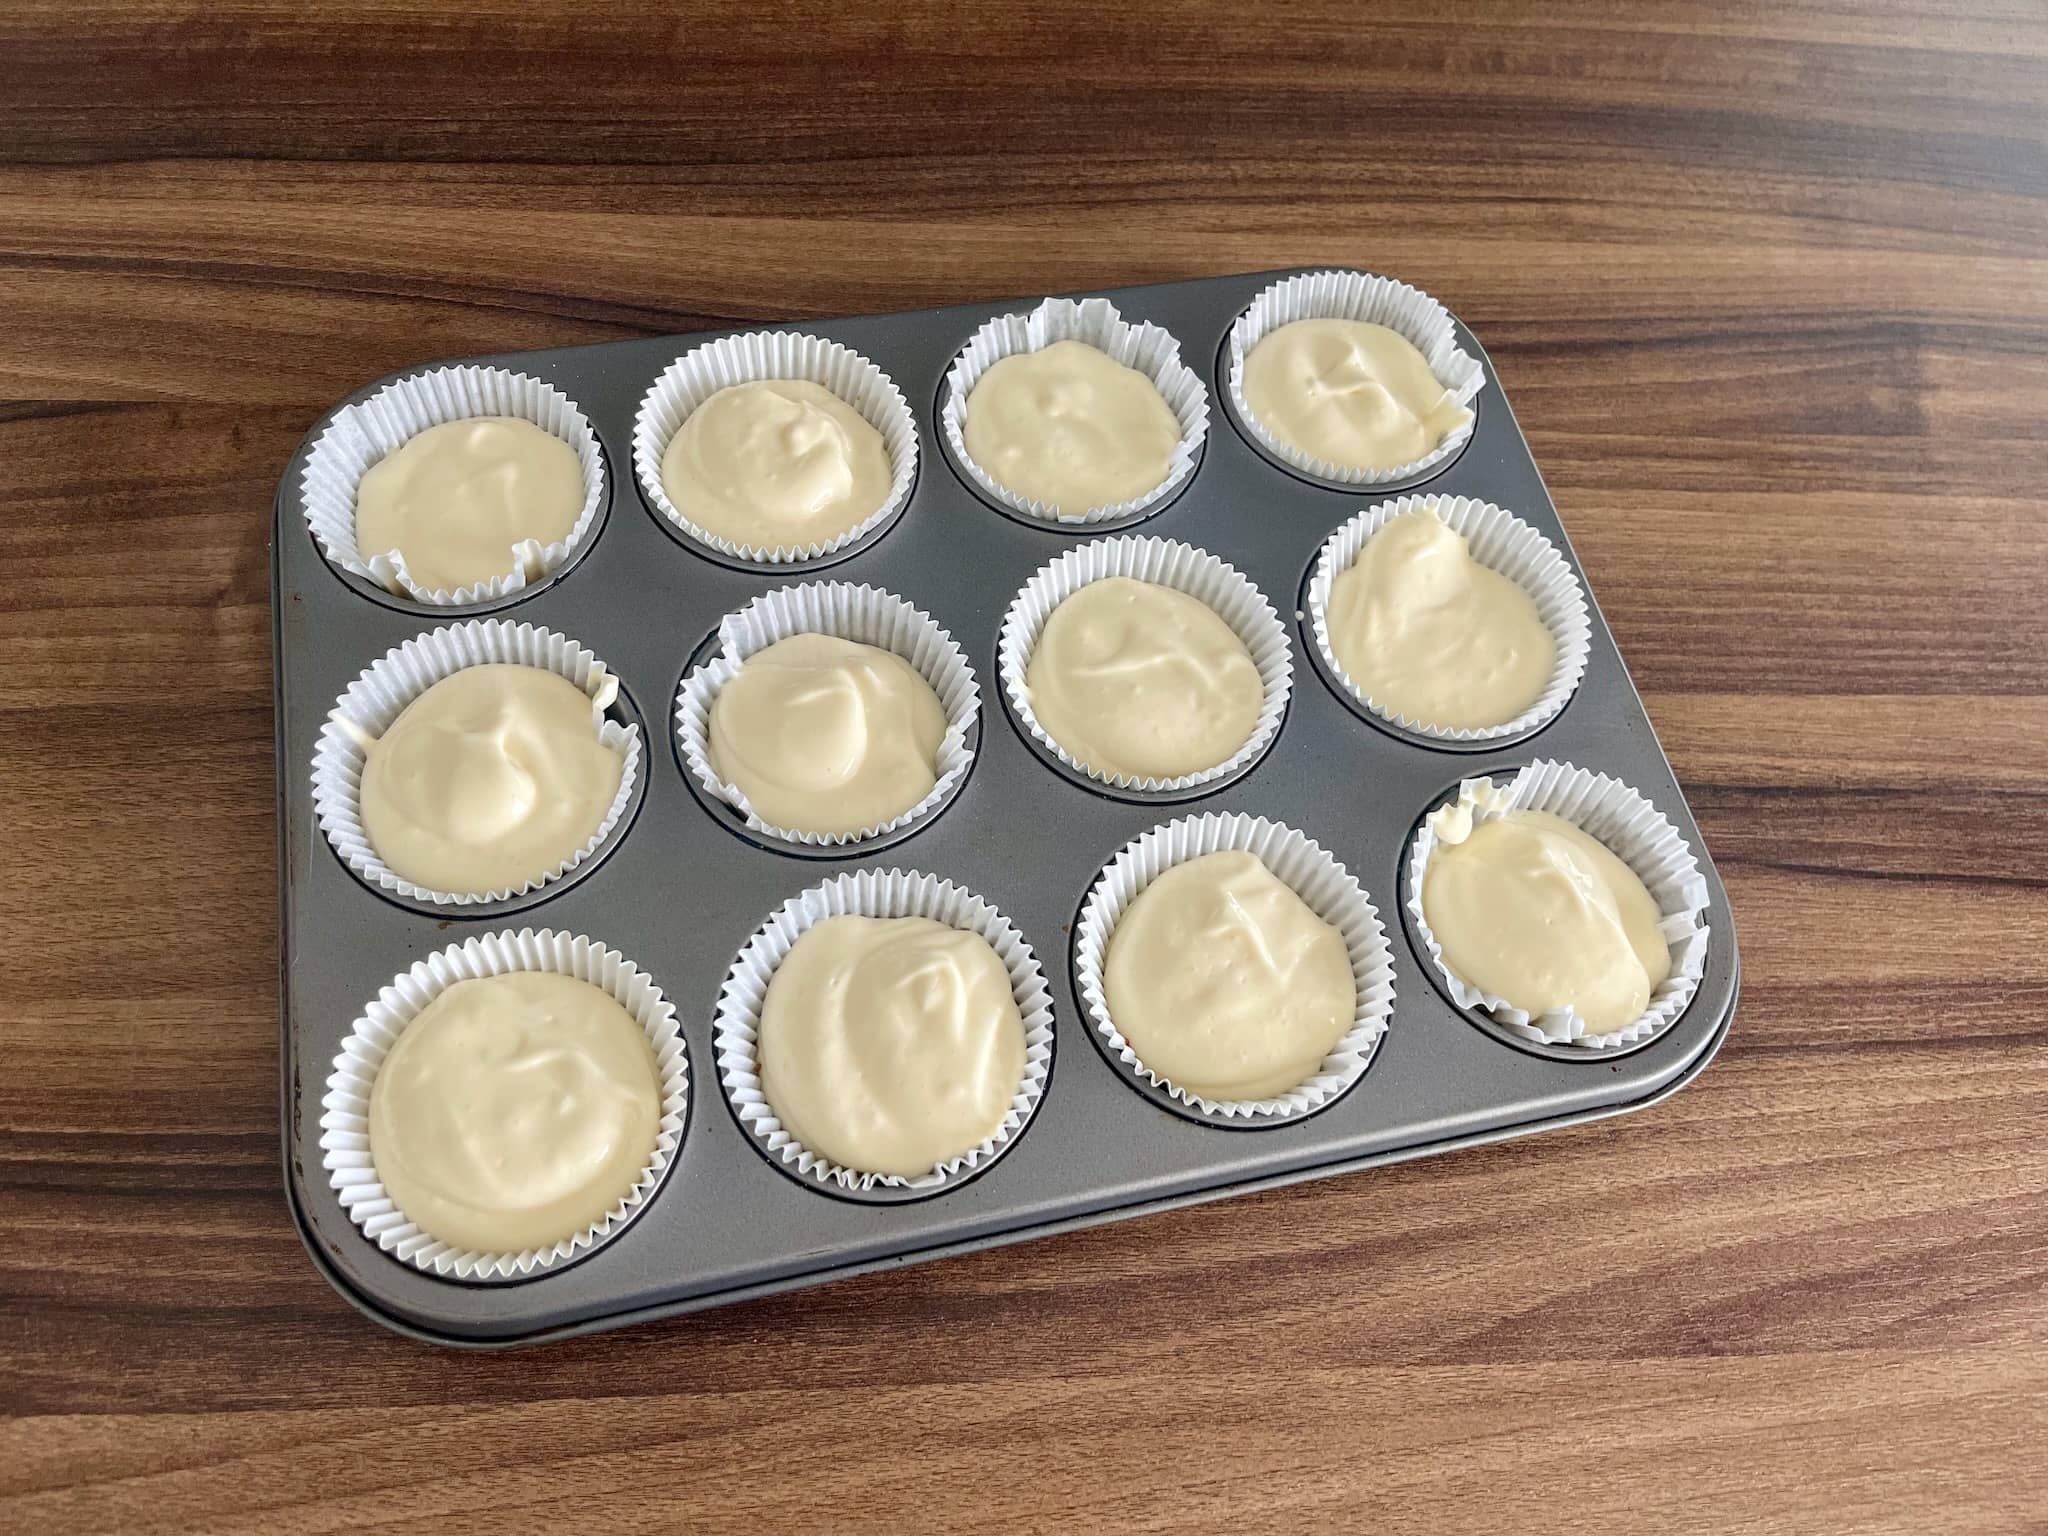 Cupcake cases filled with cheesecake mix